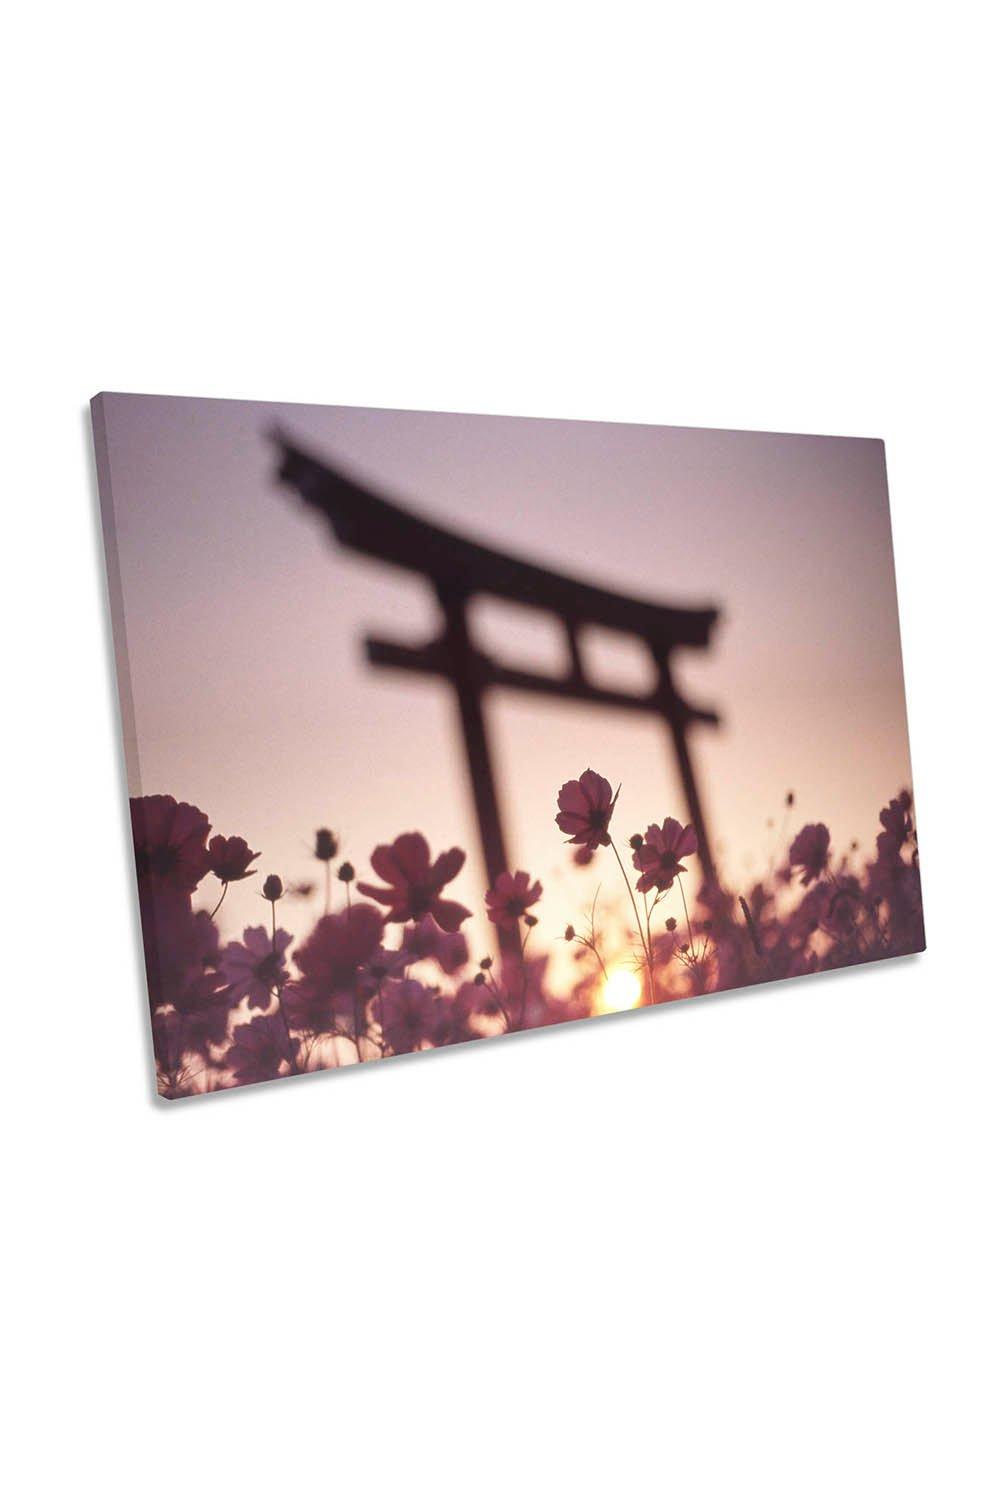 Japan Gateway Asia Flowers Canvas Wall Art Picture Print